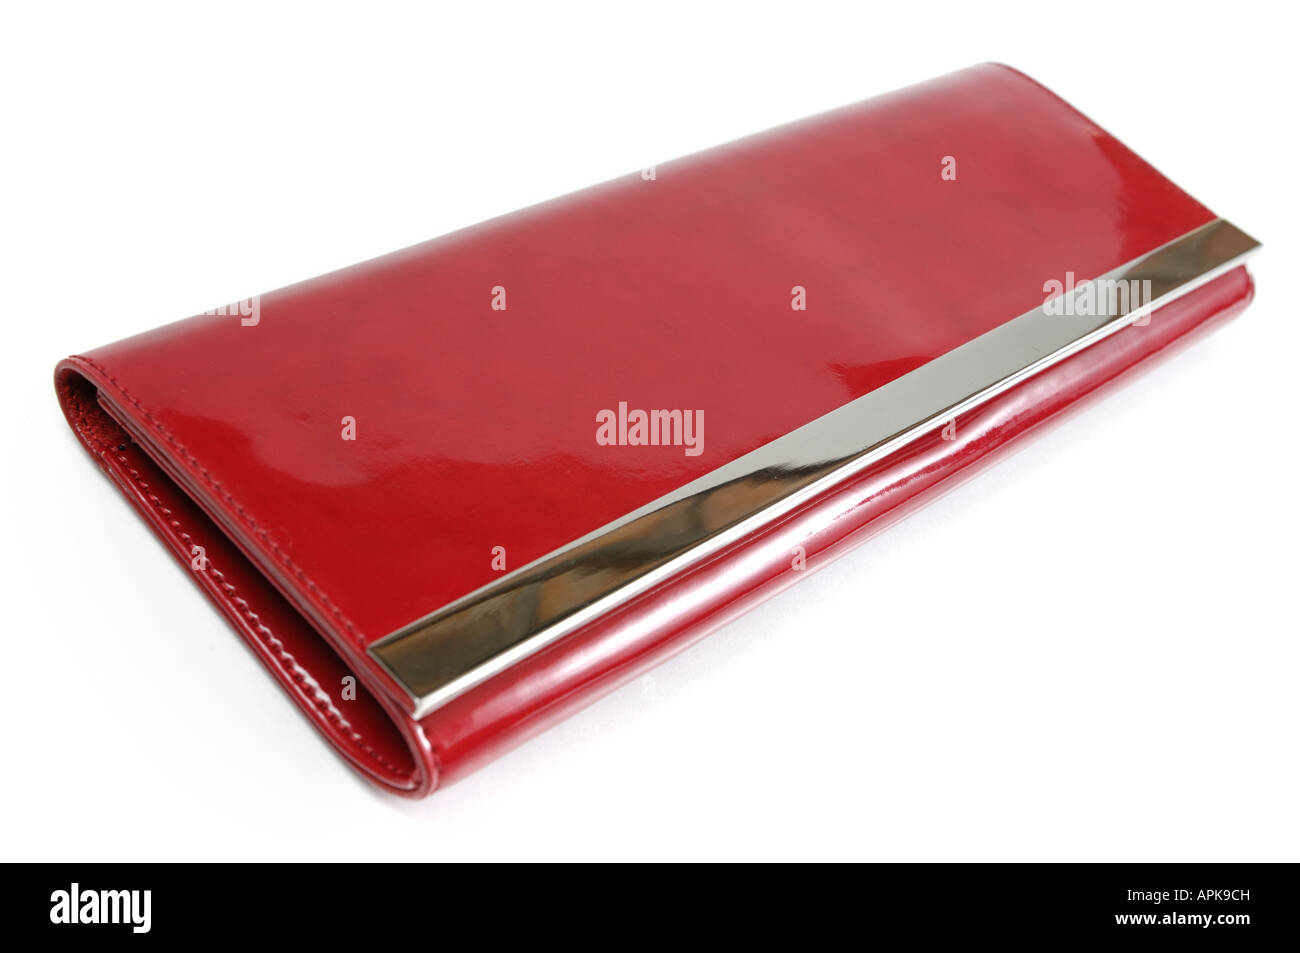 Aldo bag hi-res stock photography and images - Alamy